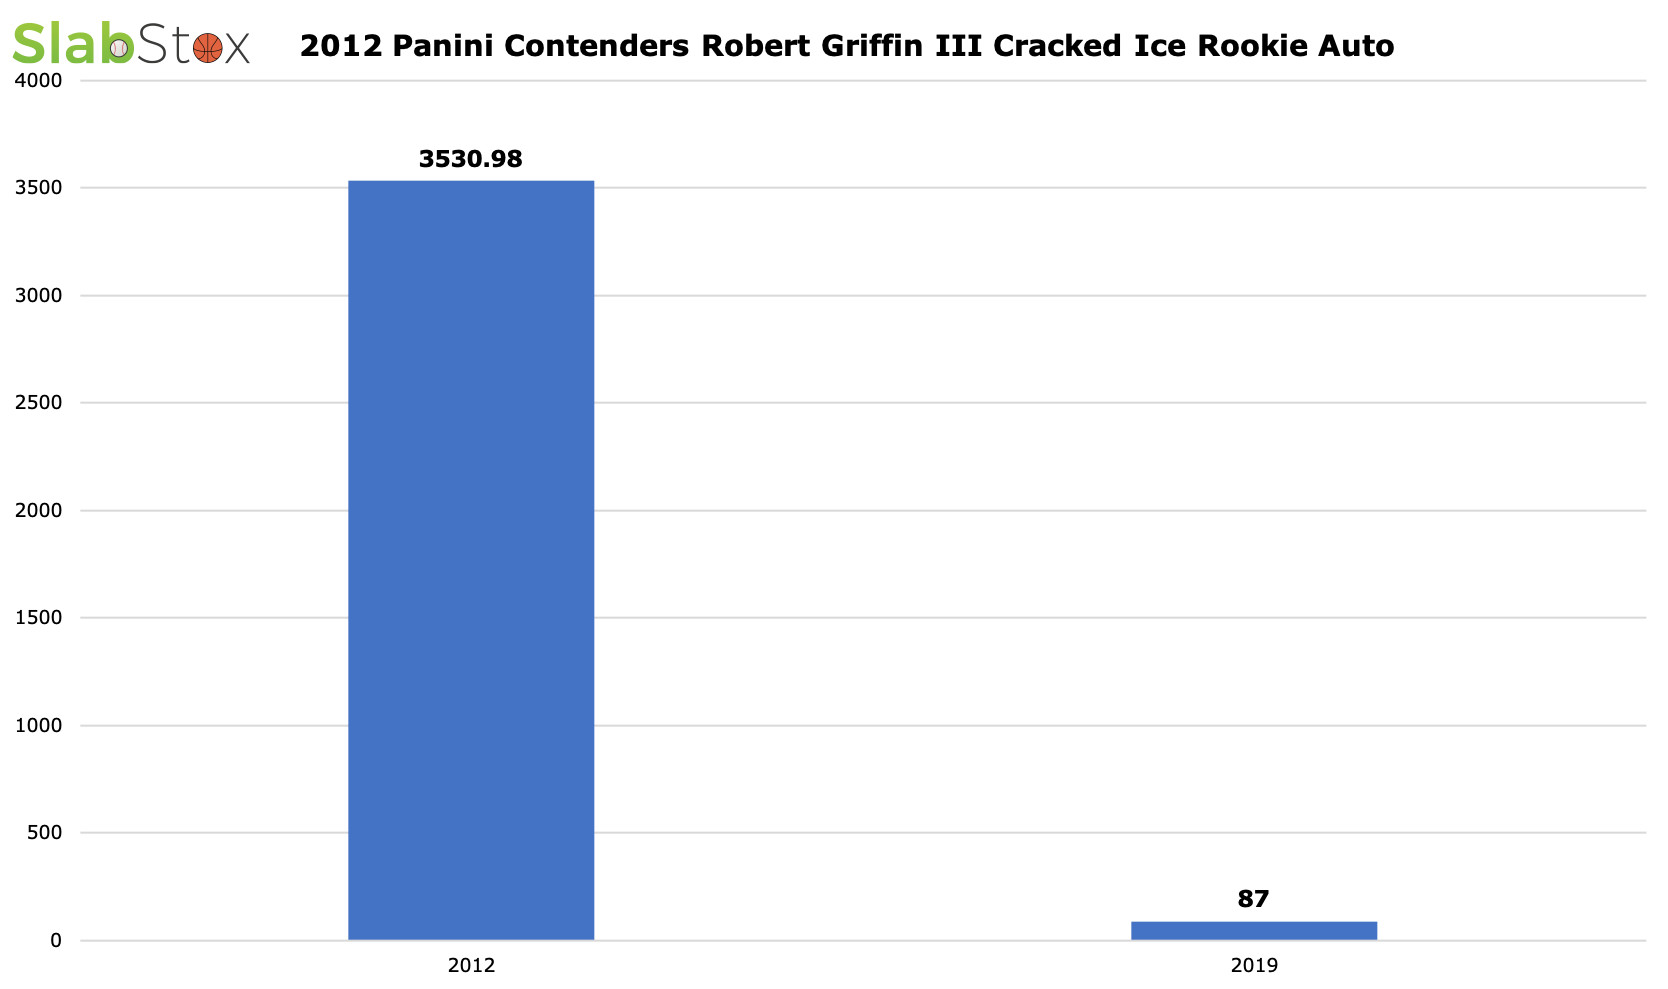 Slabstox infographic of 2012 Panini Contenders Robert Griffin III Cracked Ice Rookie Auto sports trading card